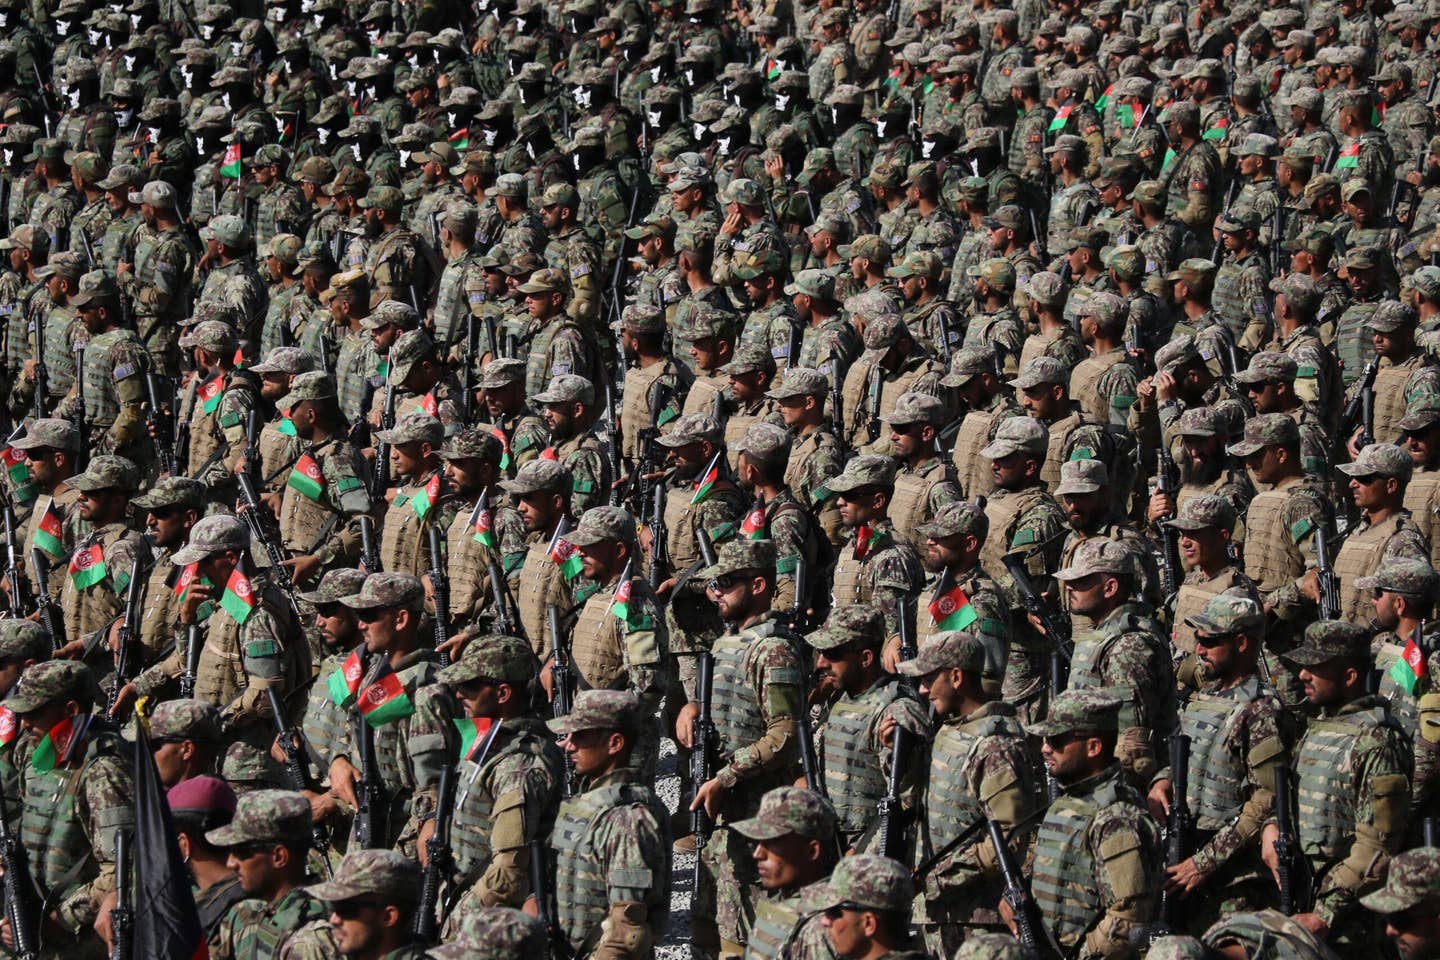 Afghan special force commando unit officers and soldiers attend a graduation ceremony at the military academy in Kabul, Afghanistan, on May 31, 2021. (Photo by Haroon Sabawoon/Anadolu Agency via Getty Images)